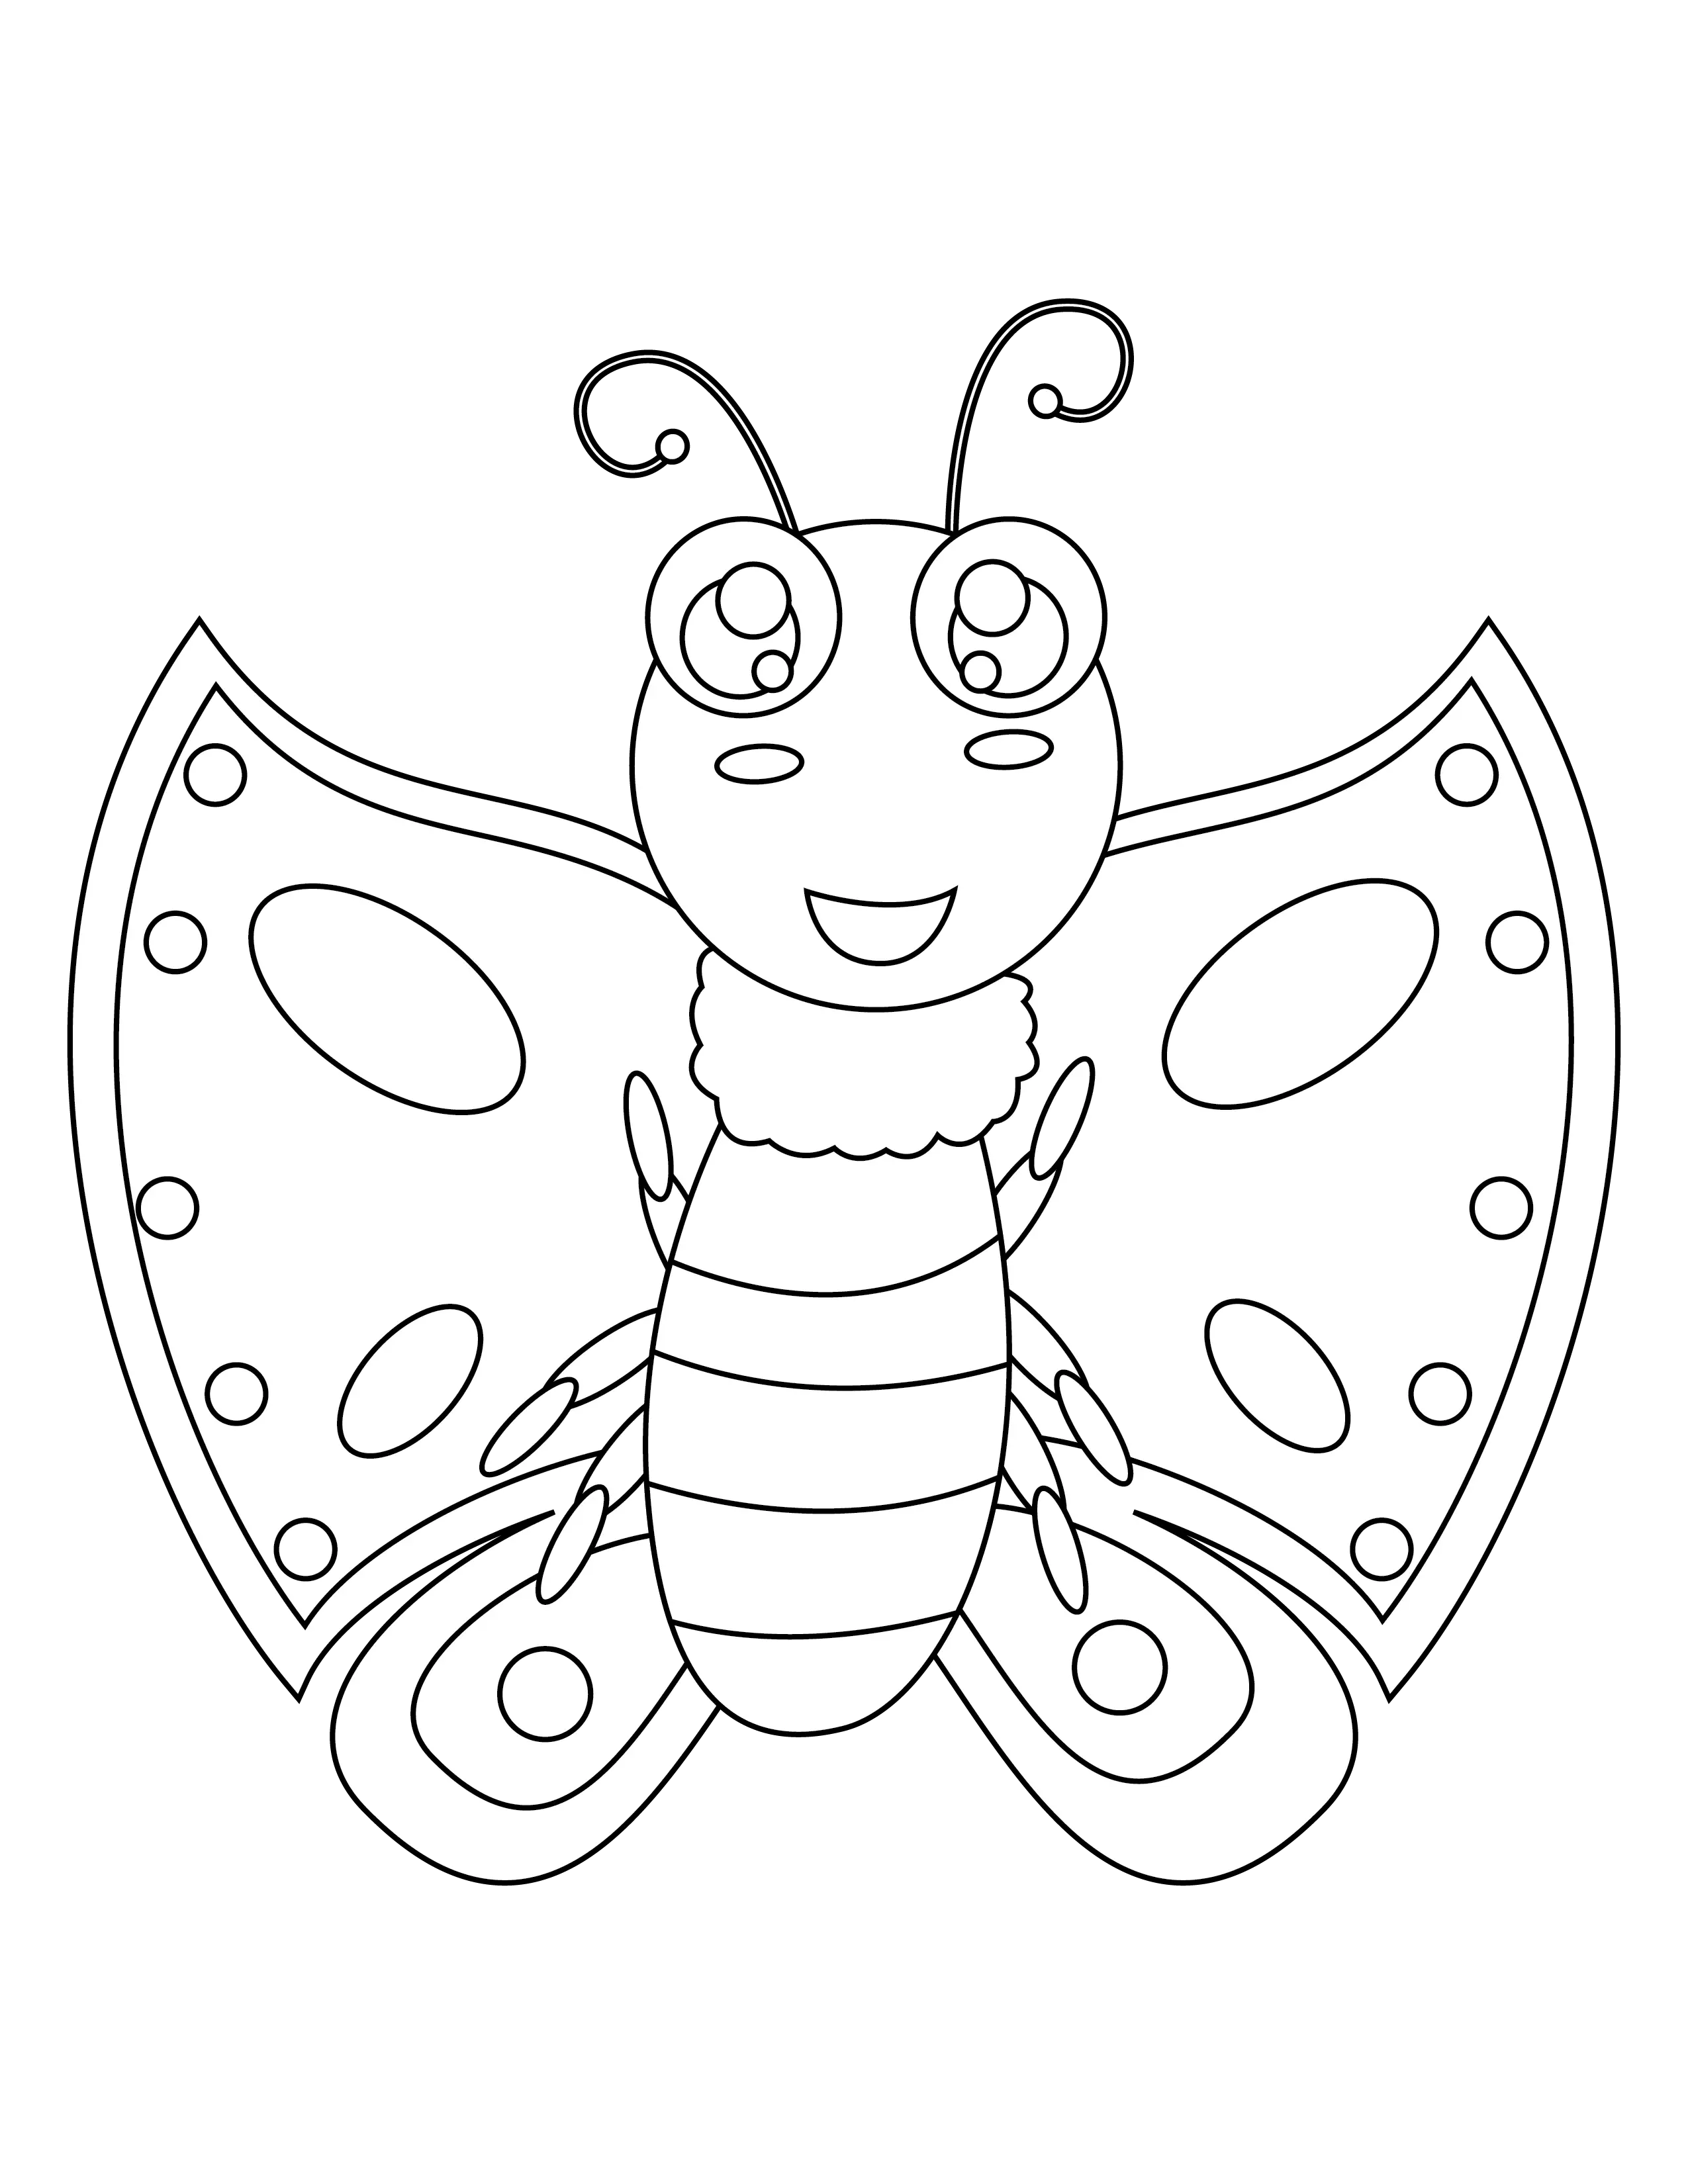 CUTE-butterfly-coloring-page-insect-for-kids-outline-doodle-illustration-printable